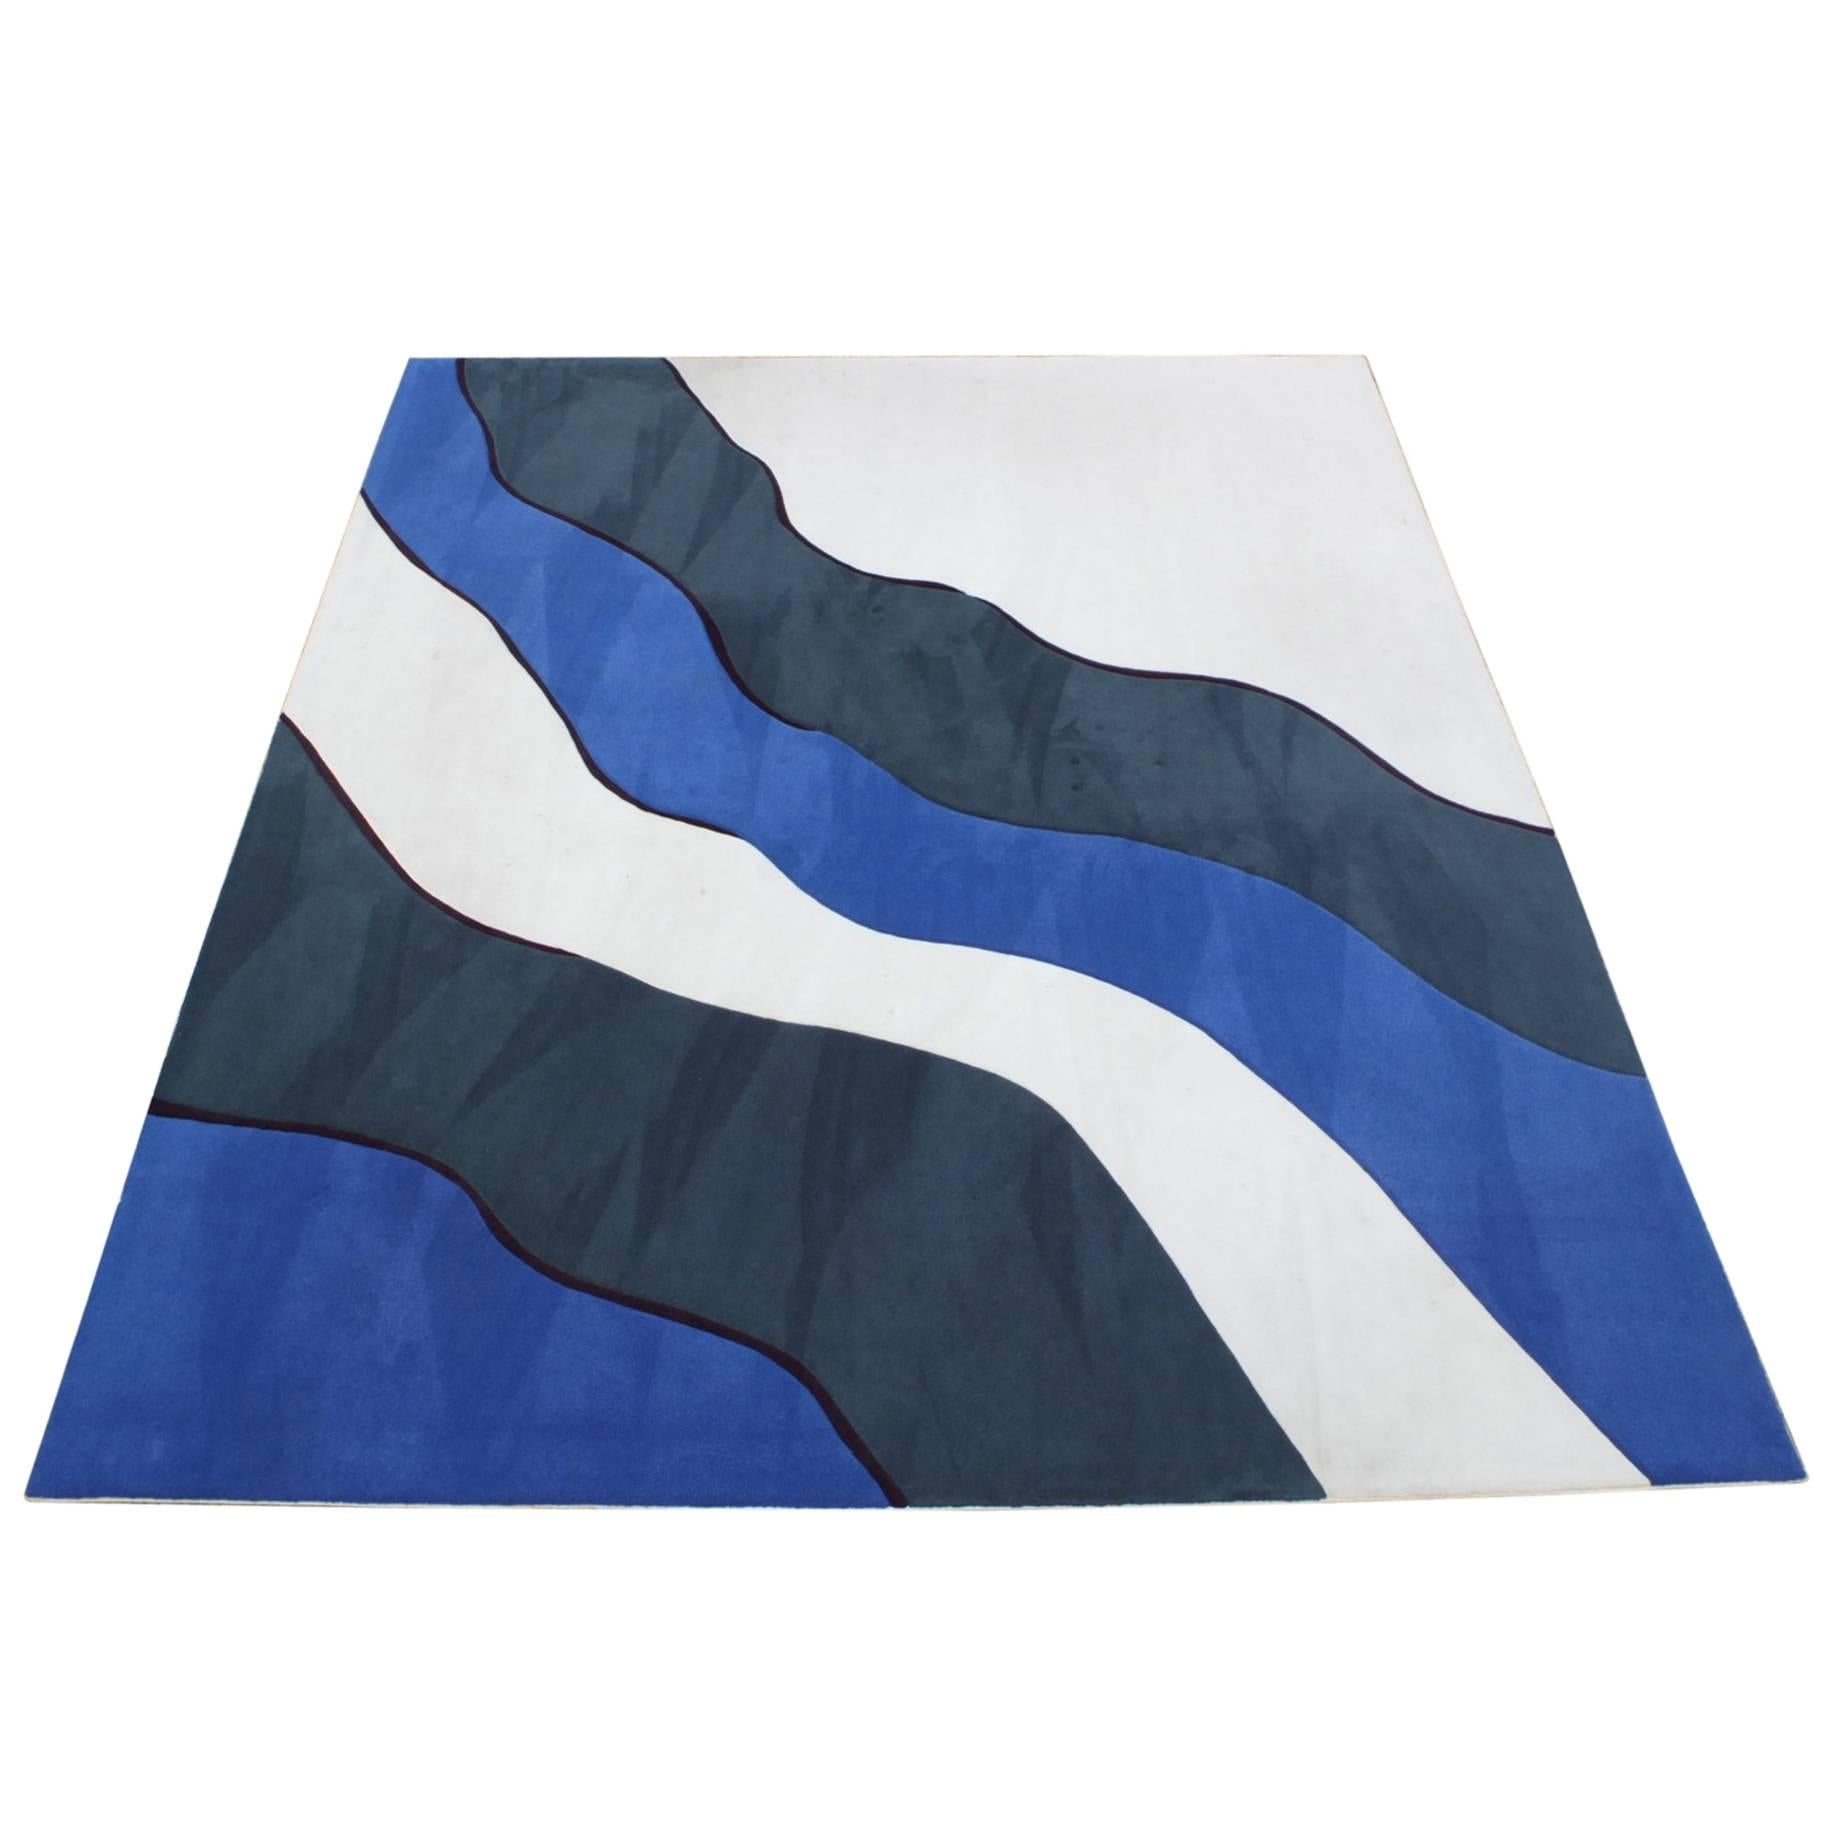 Abstract Waves Wool Rug 10’ x 13’ in Style of Edward Fields